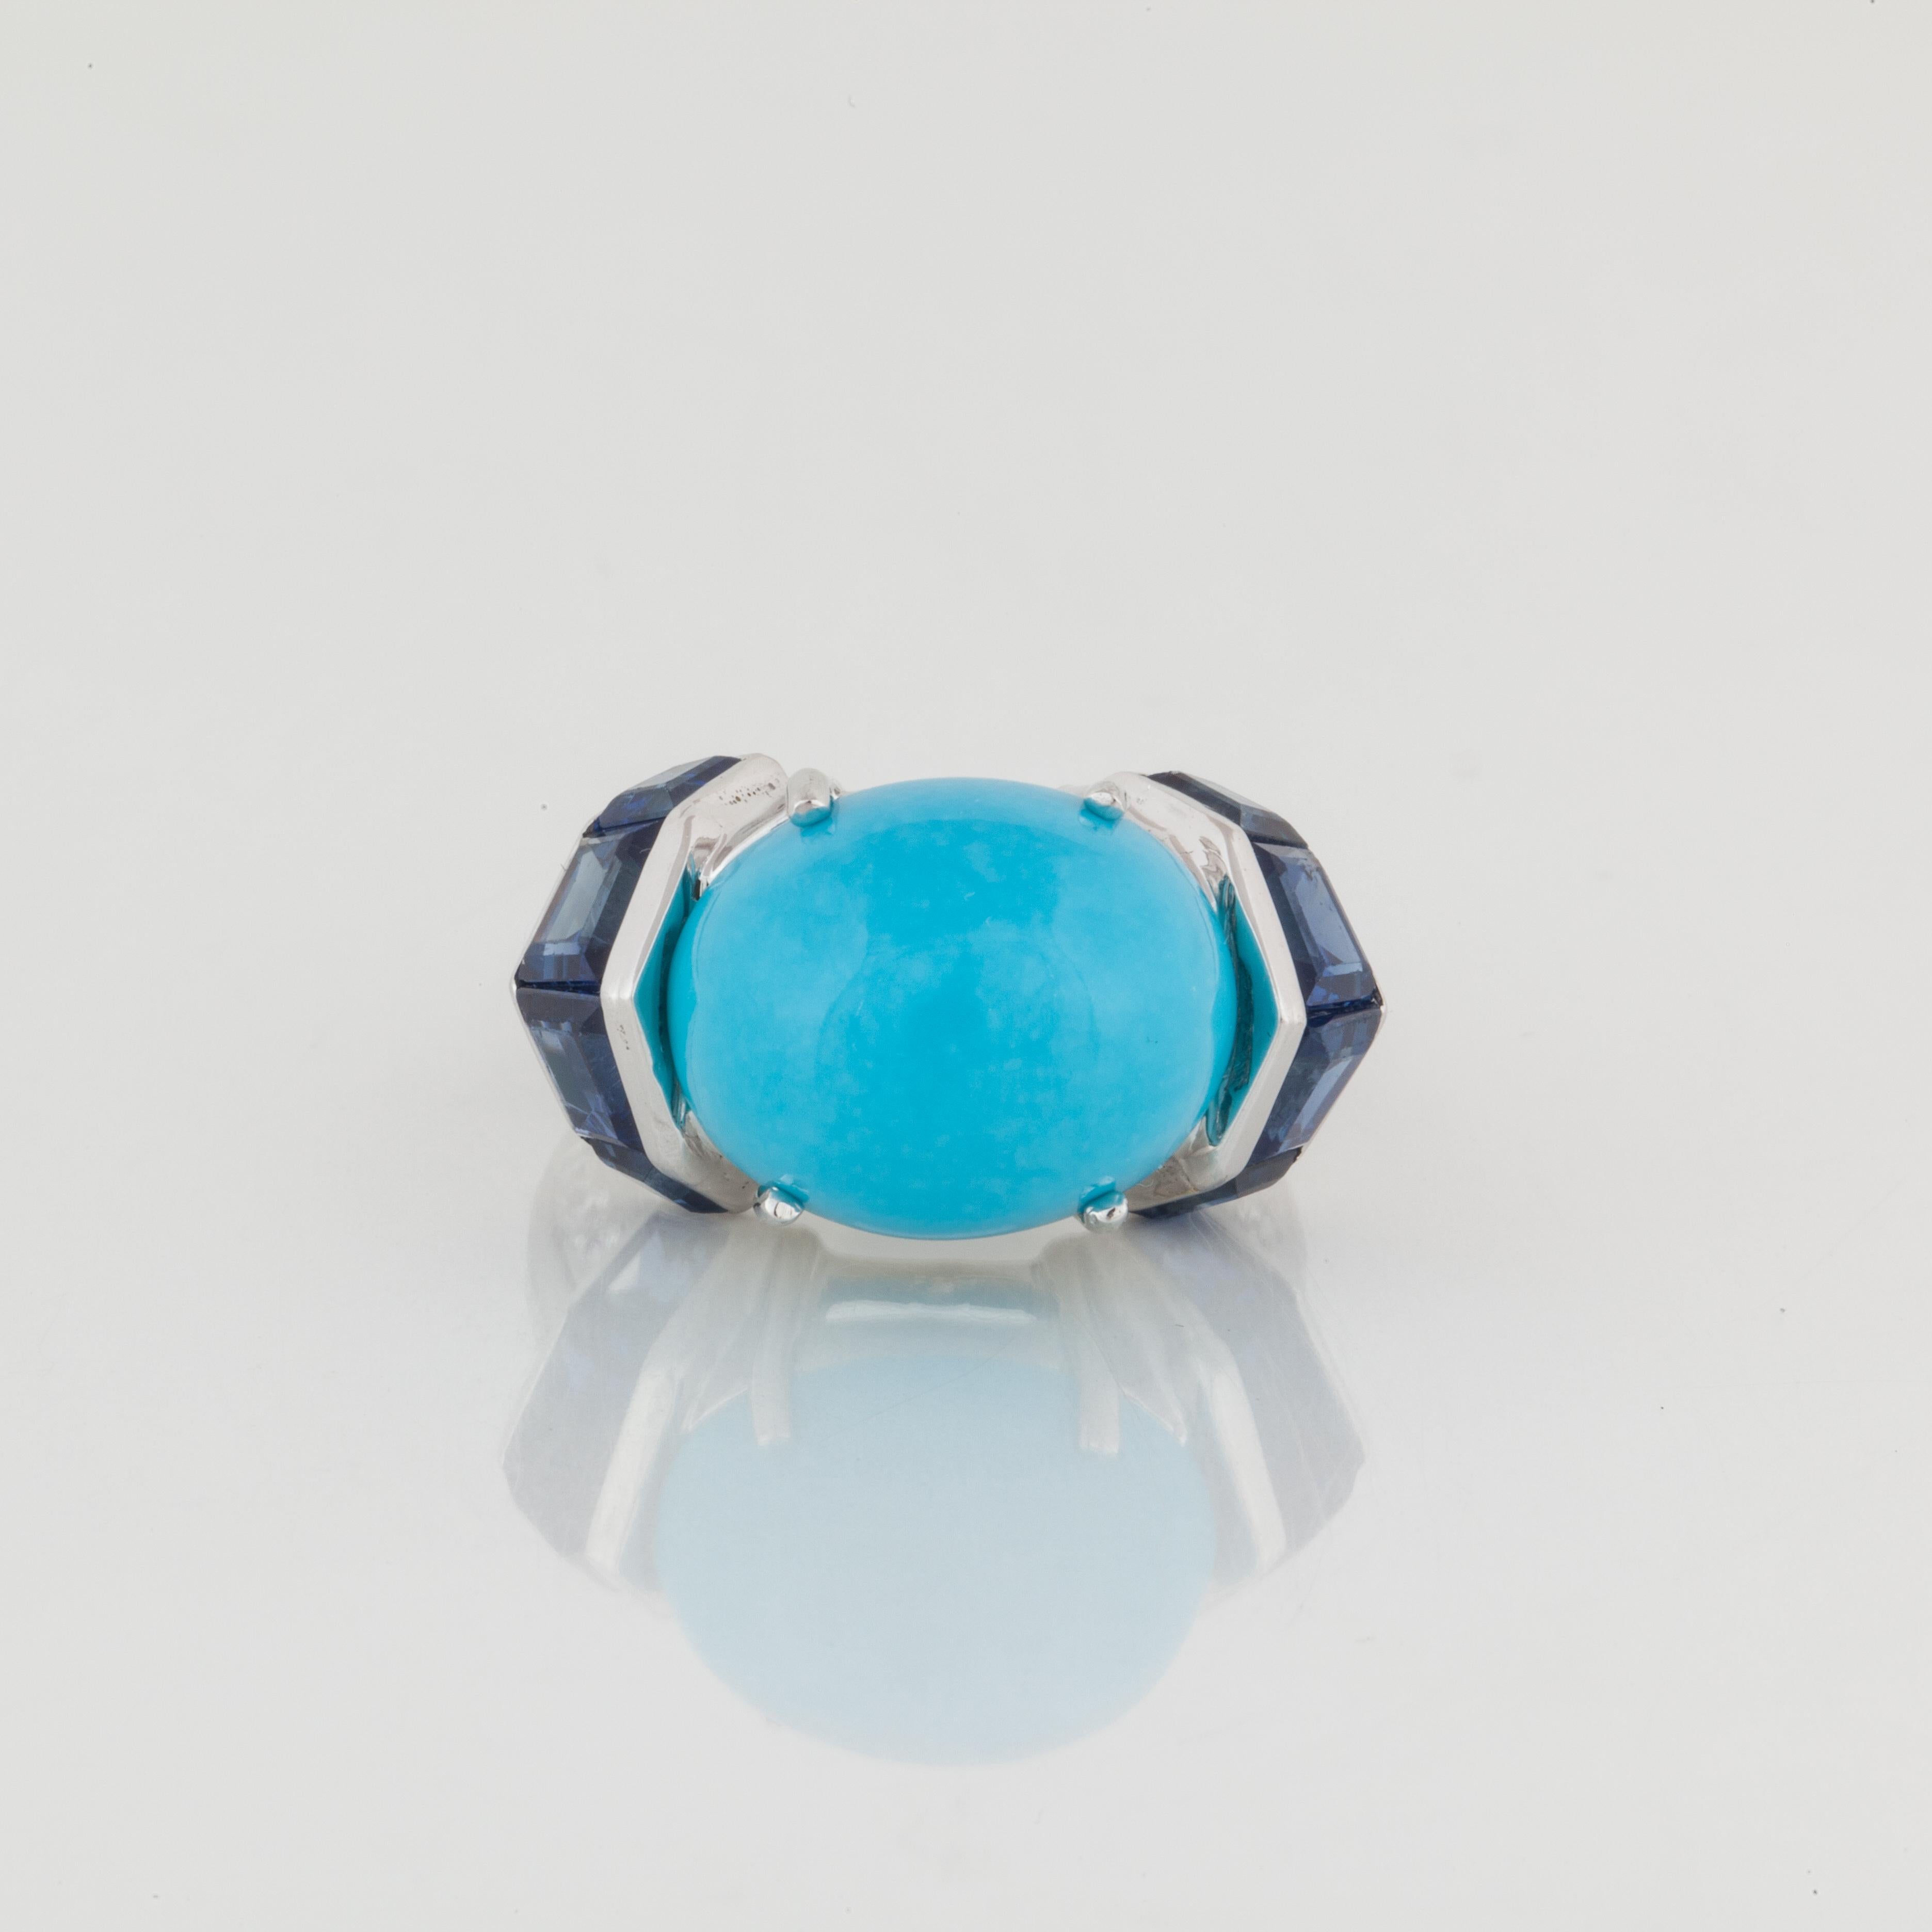 Platinum ring featuring a cabochon turquoise accented by calibré cut blue sapphires and diamonds. There are 12 round diamonds and 6 baguette diamonds with a total carat weight of 0.38; H-I color and VS clarity.  Presentation area is 1 inch by 1 inch